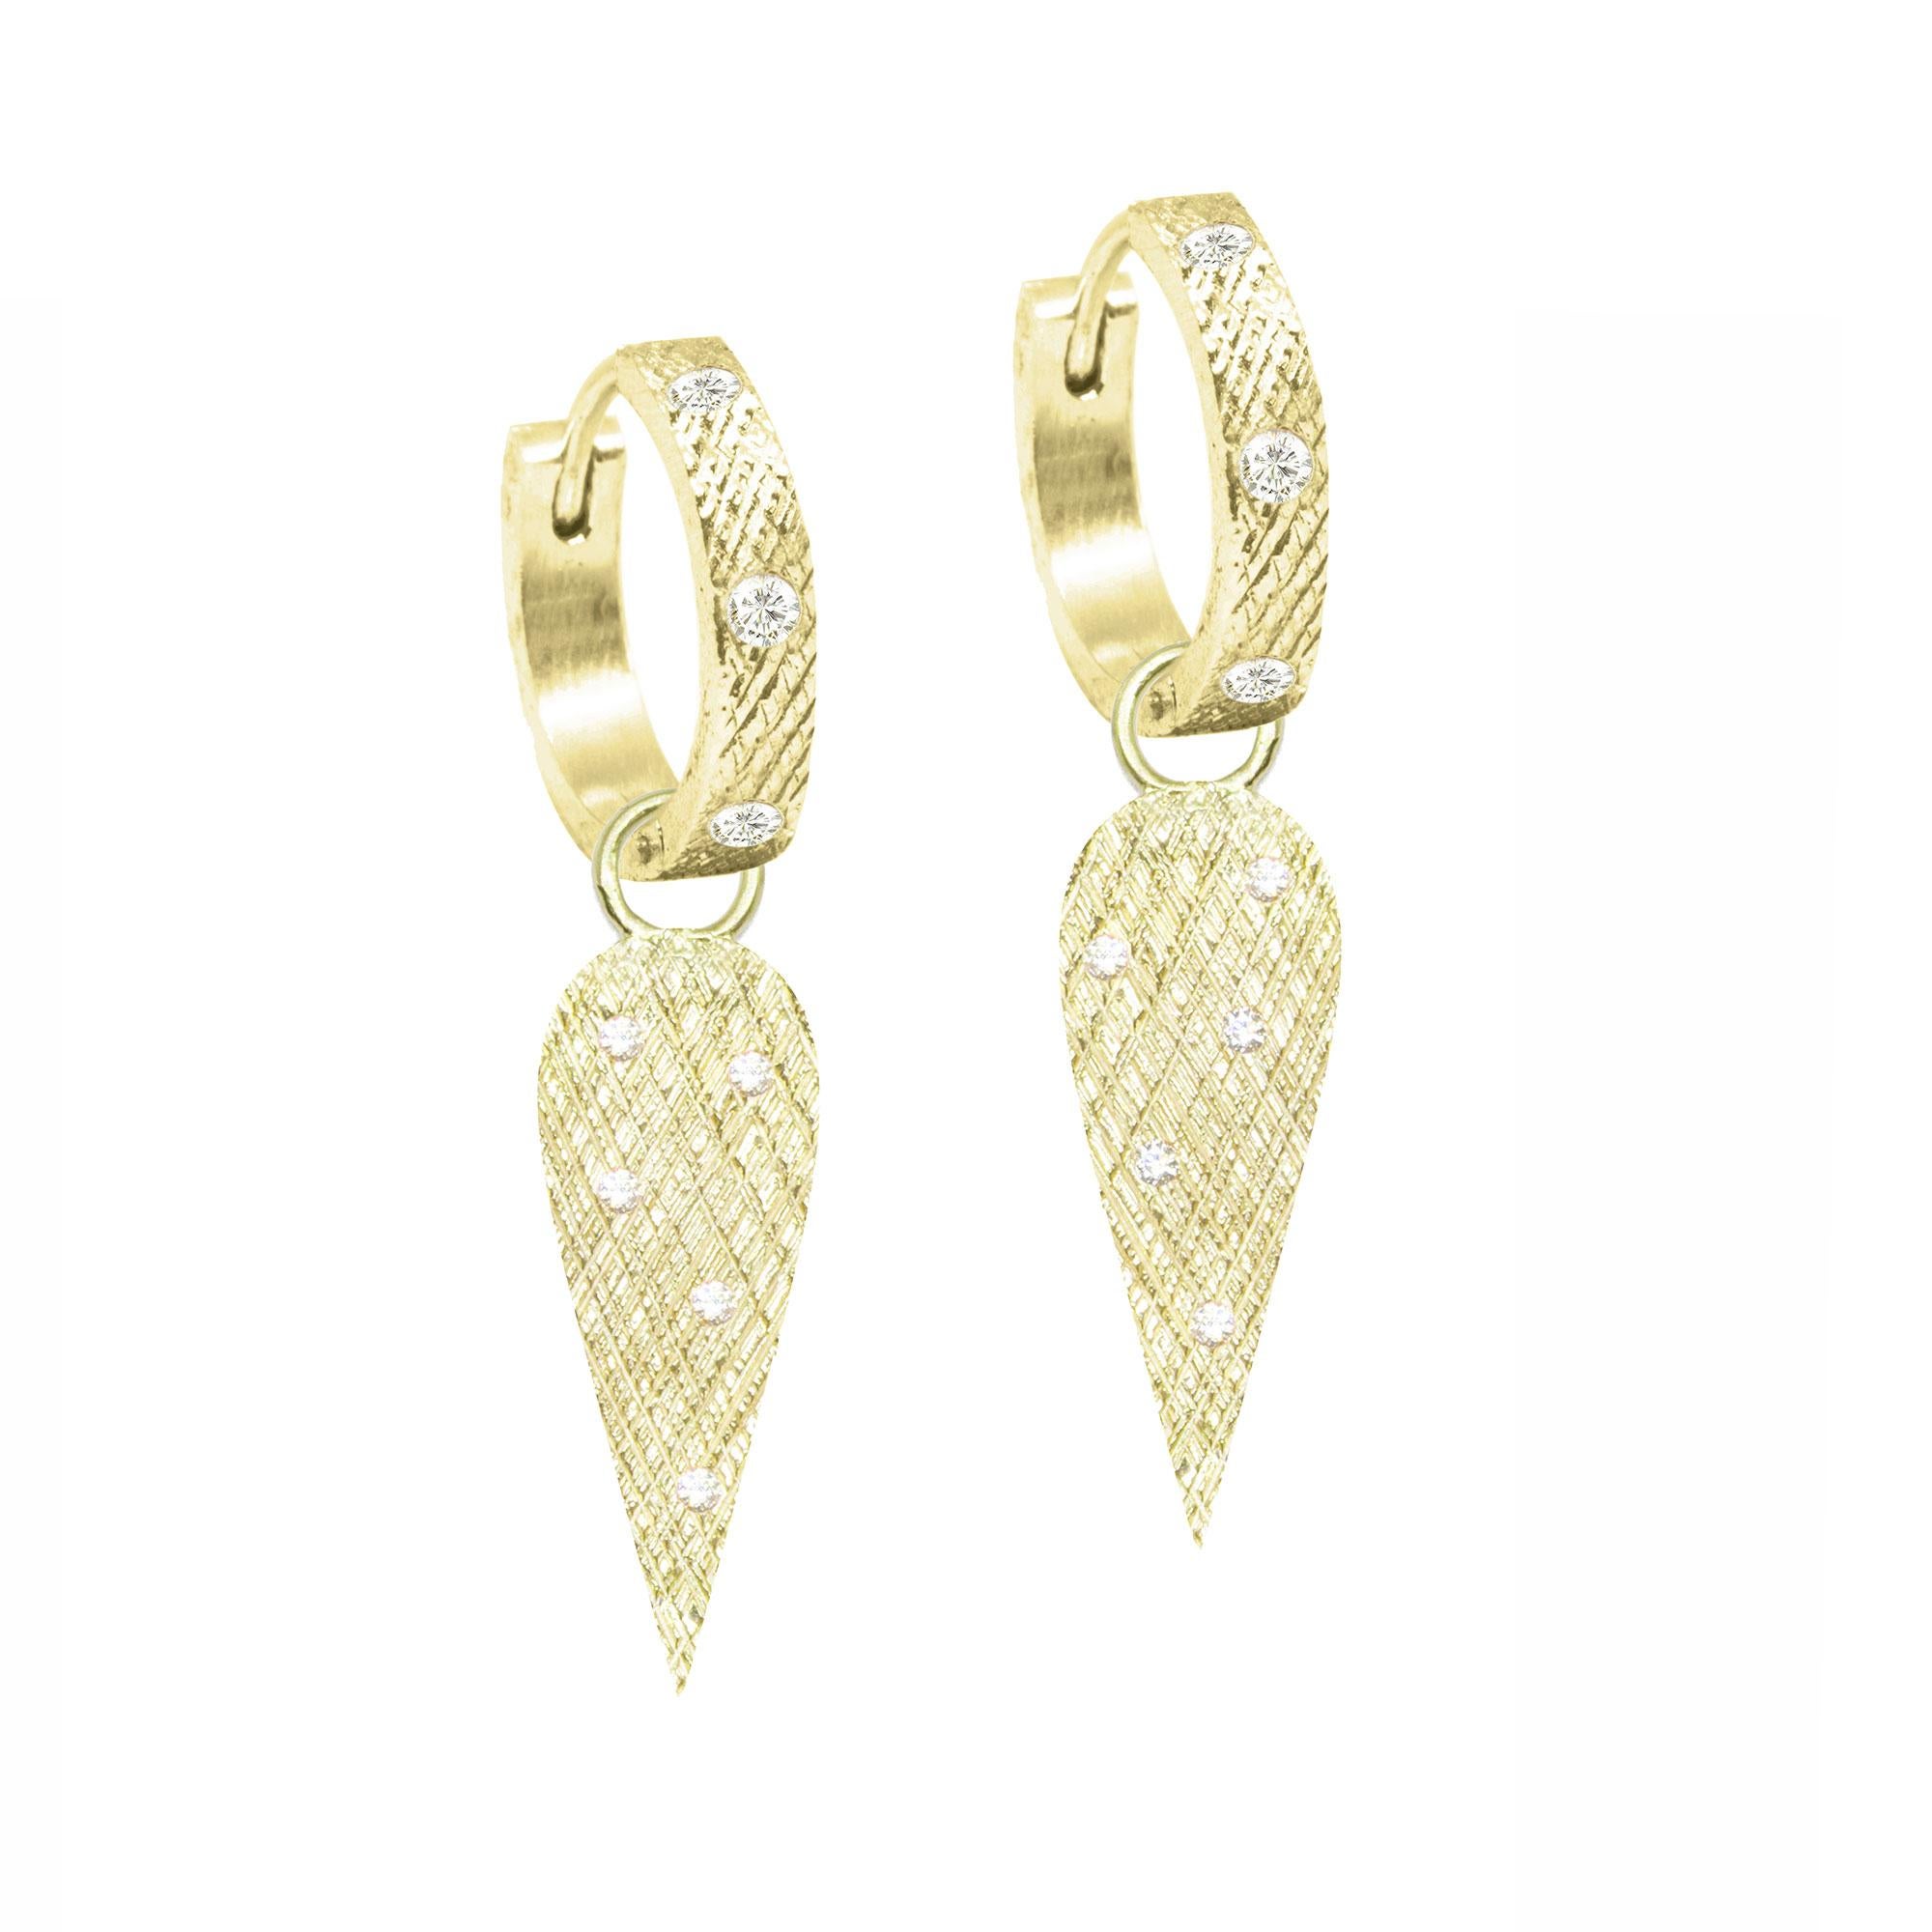 The perfect everyday style, especially when you want a subtle pop of color, the Angel Wings 20mm Gold Charms scatter diamonds on a rich gold background detailed with a feather-like crosshatch pattern.

Hoops and charms are sold separately. PICK YOUR